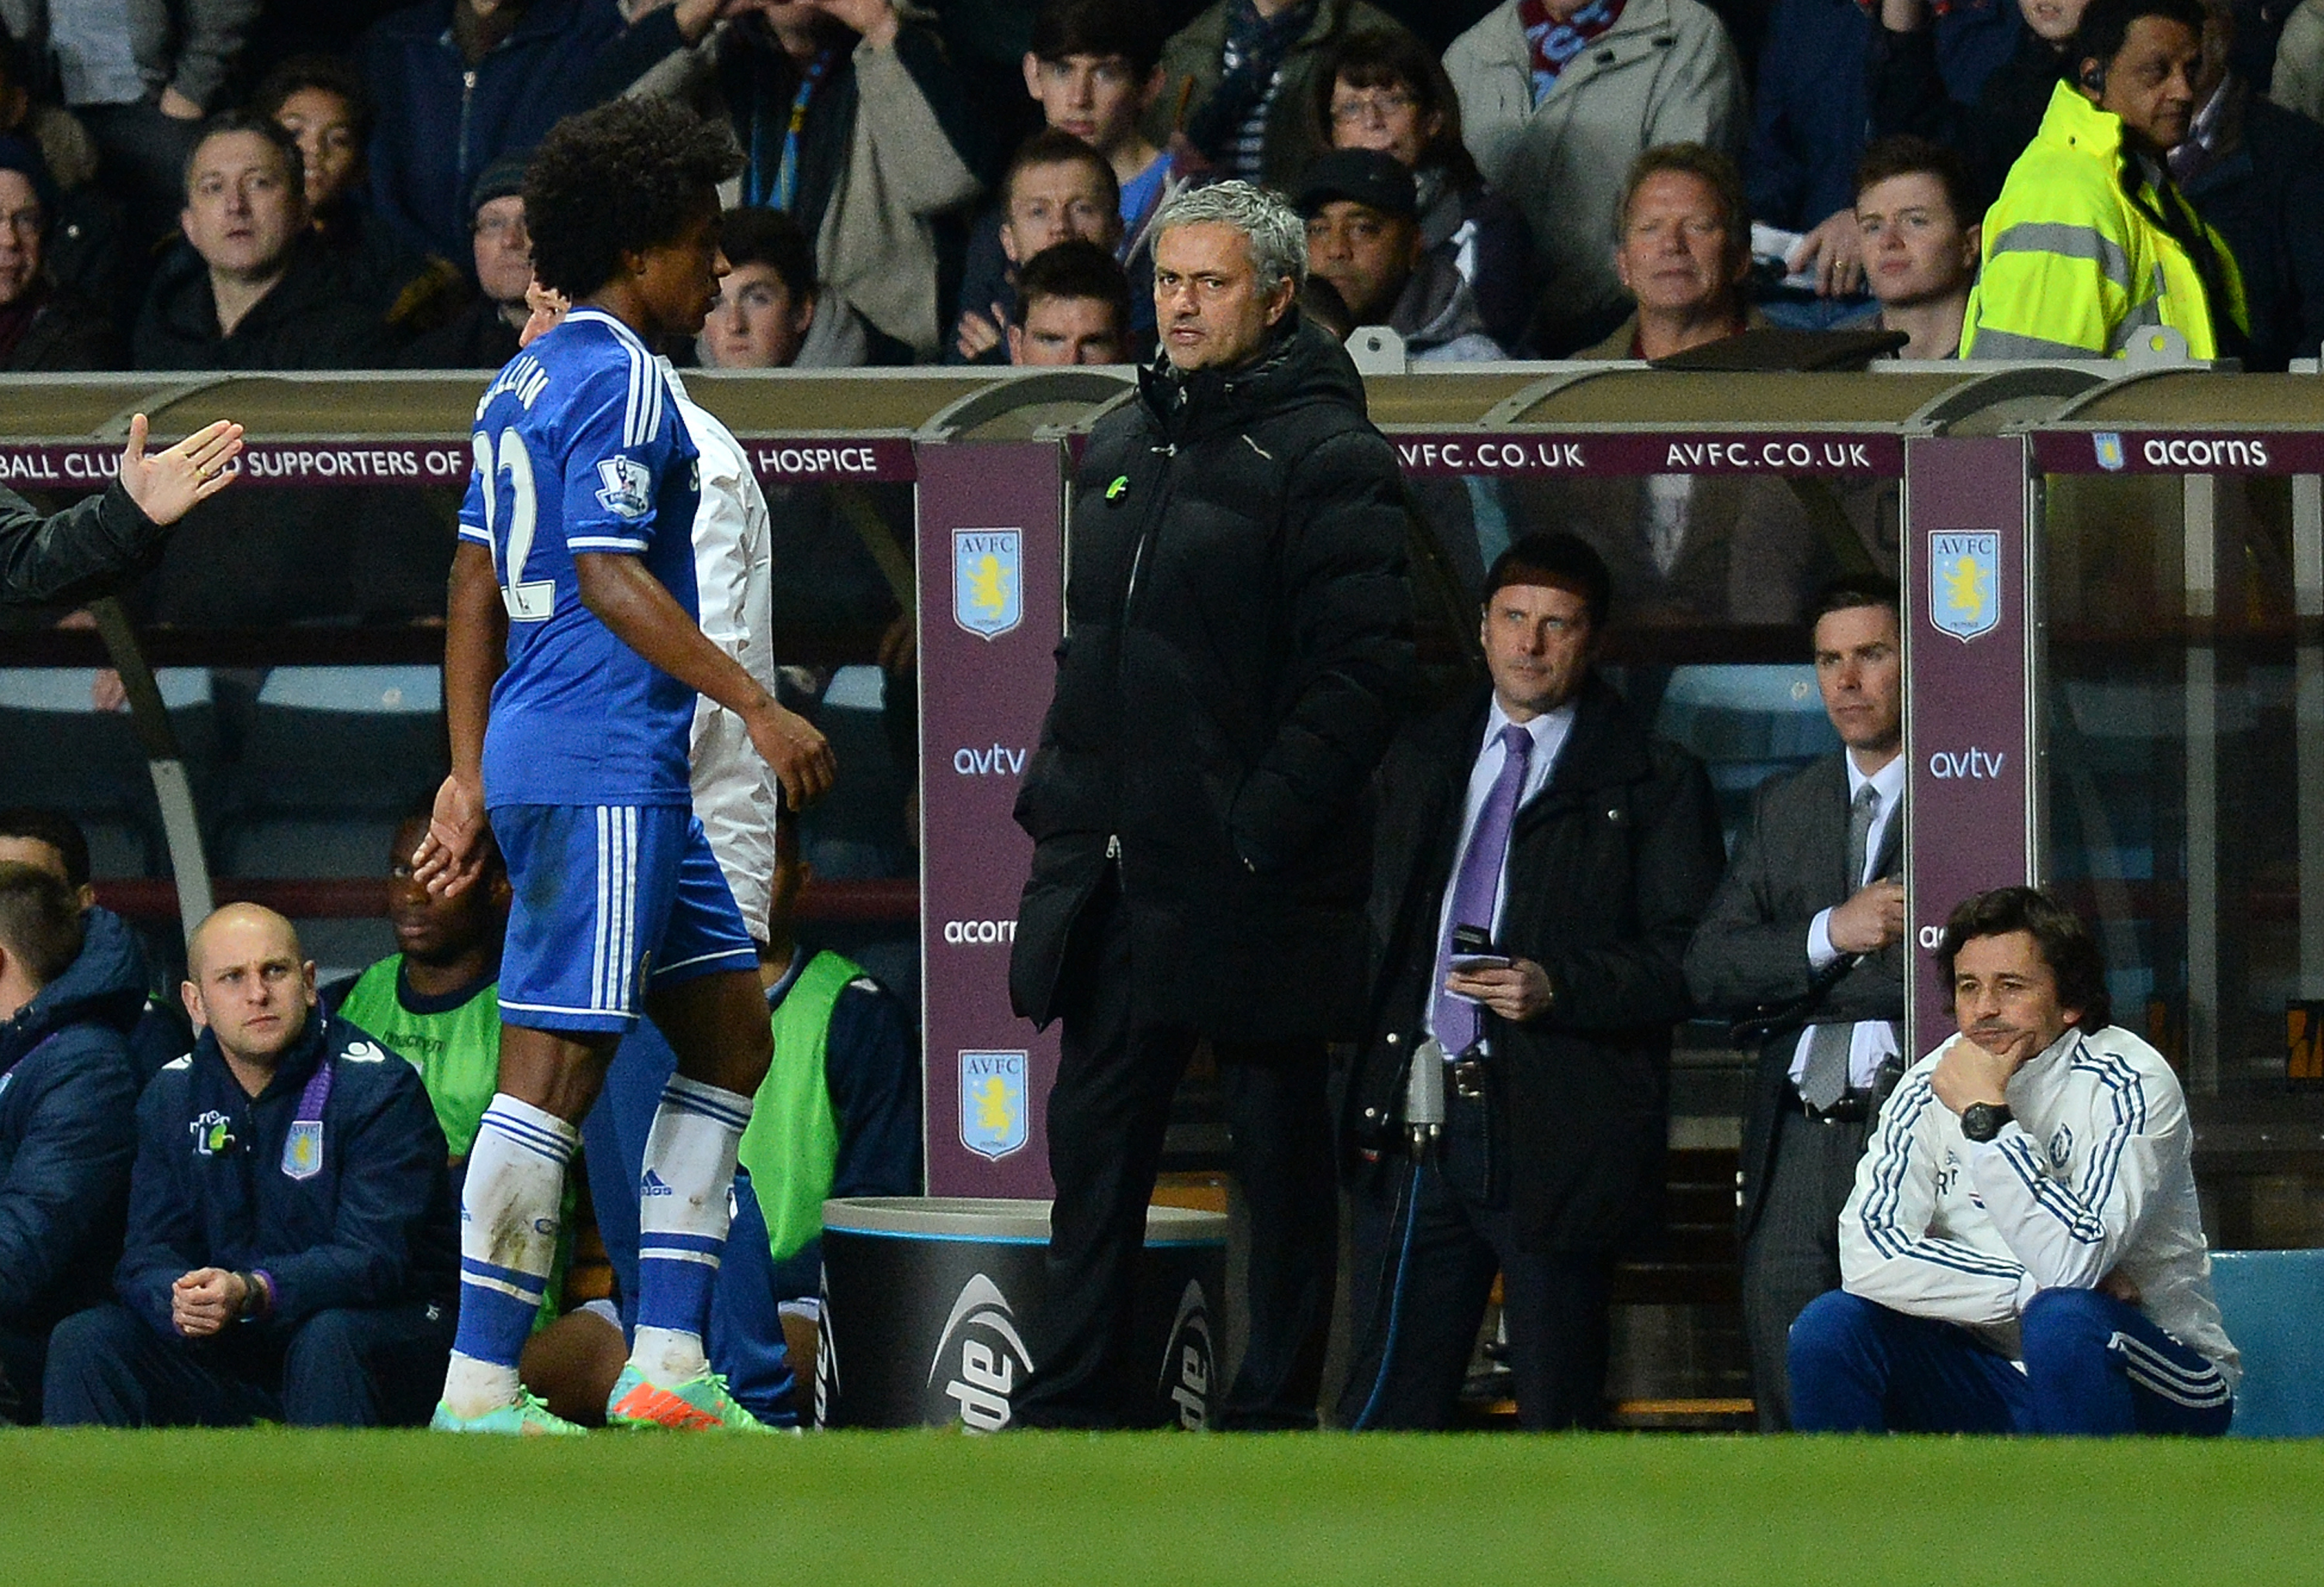 Chelsea's Portuguese manager Jose Mourinho (C) looks on as Chelsea's Brazilian midfielder Willian (L) walks past after being sent off during the English Premier League football match between Aston Villa and Chelsea at Villa Park in Birmingham on March 15, 2014. AFP PHOTO/ANDREW YATES

RESTRICTED TO EDITORIAL USE. NO USE WITH UNAUTHORIZED AUDIO, VIDEO, DATA, FIXTURE LISTS, CLUB/LEAGUE LOGOS OR LIVE SERVICES. ONLINE IN-MATCH USE LIMITED TO 45 IMAGES, NO VIDEO EMULATION. NO USE IN BETTING, GAMES OR SINGLE CLUB/LEAGUE/PLAYER PUBLICATIONS.        (Photo credit should read ANDREW YATES/AFP/Getty Images)